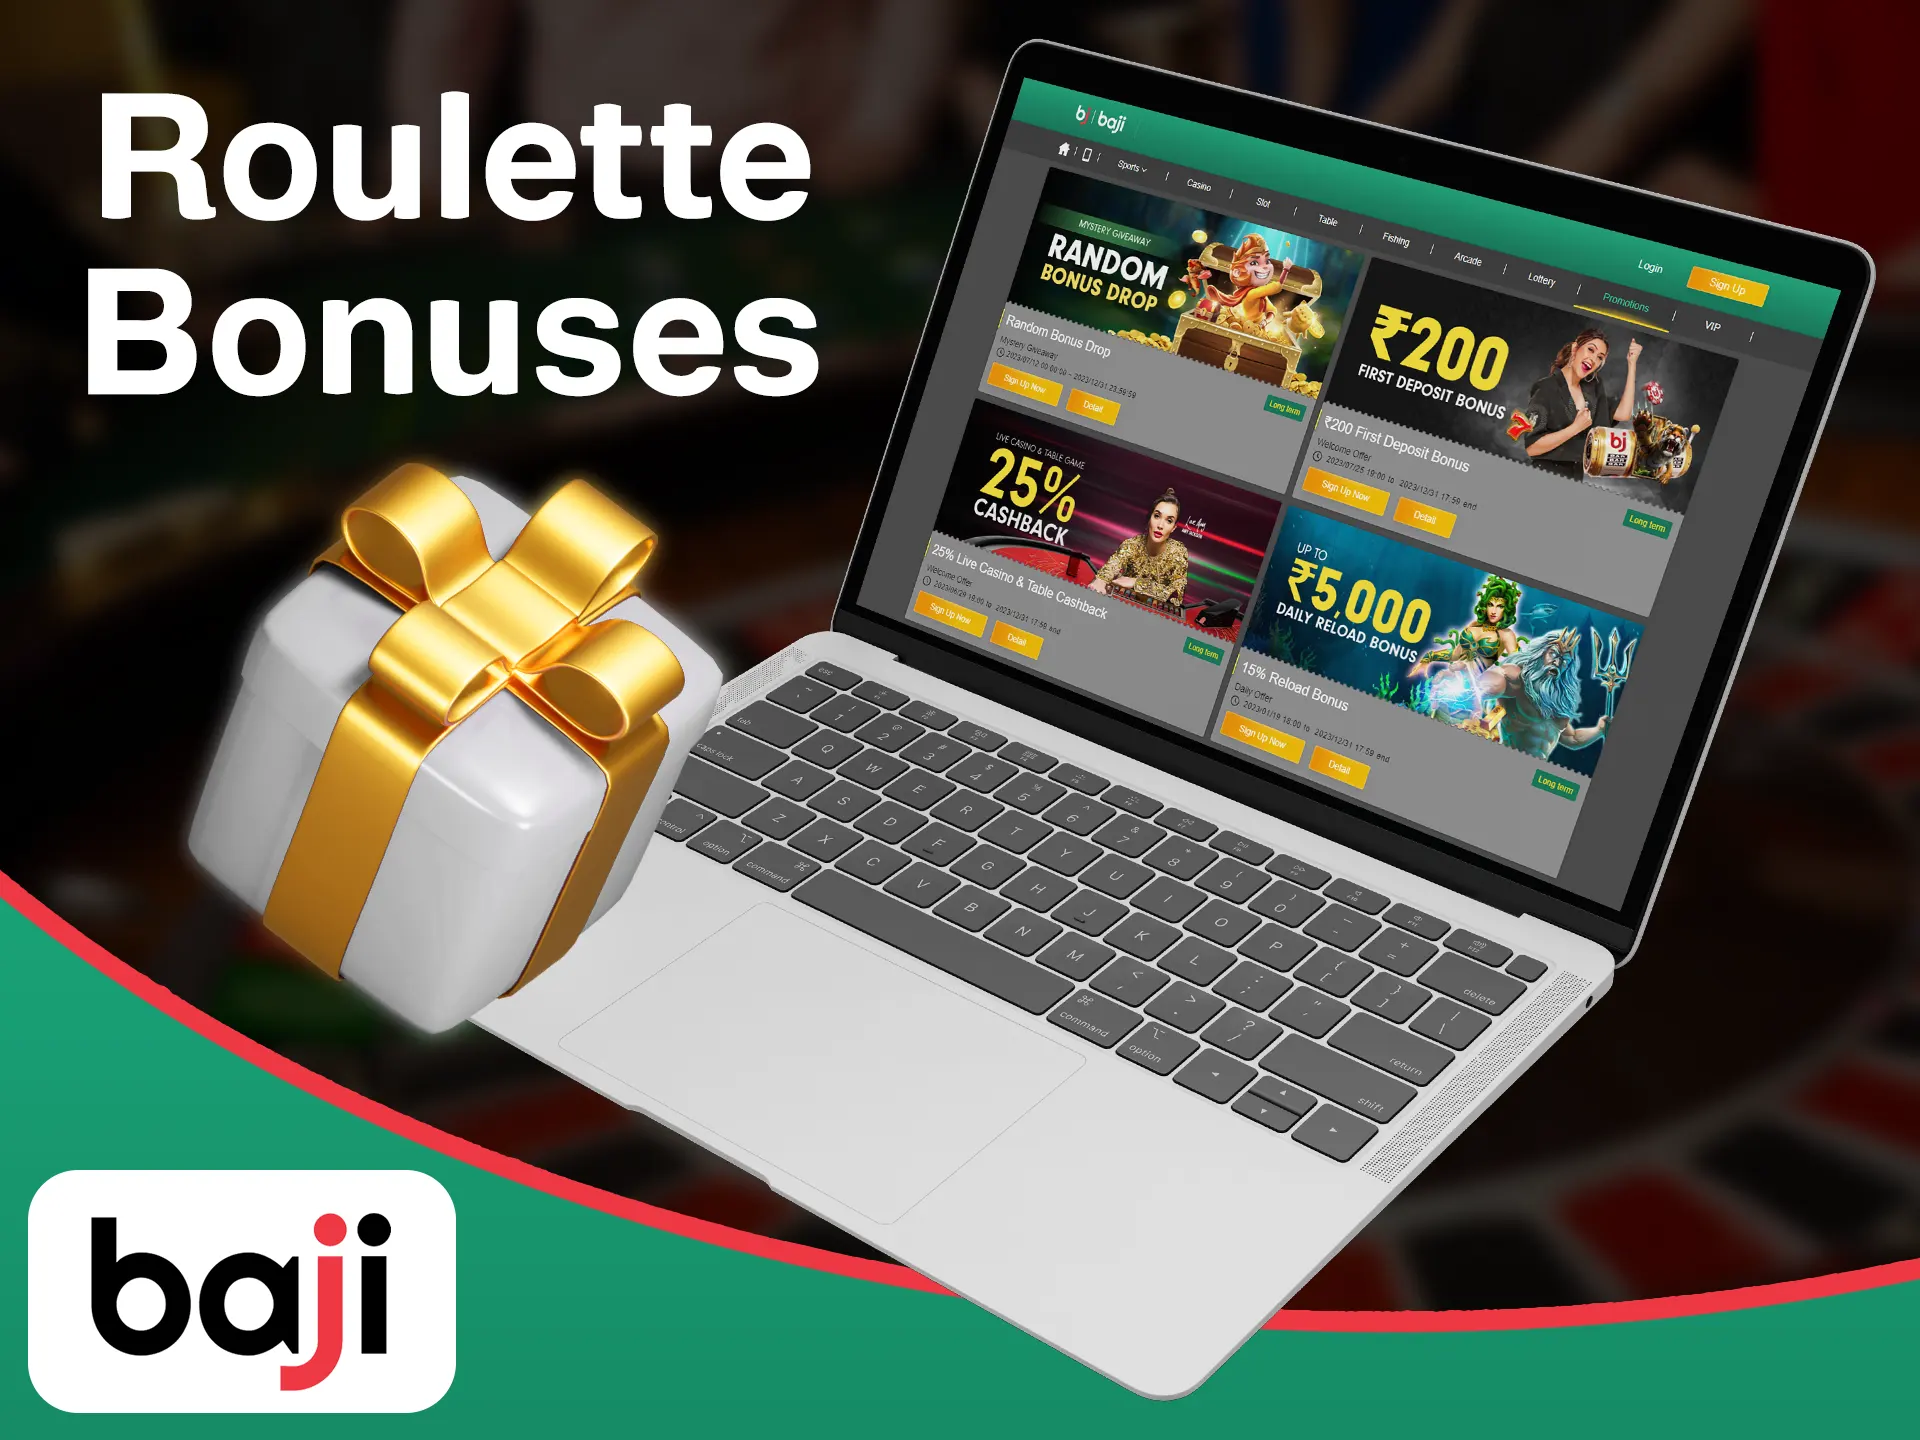 Get the best Baji bonuses by playing roulette games.